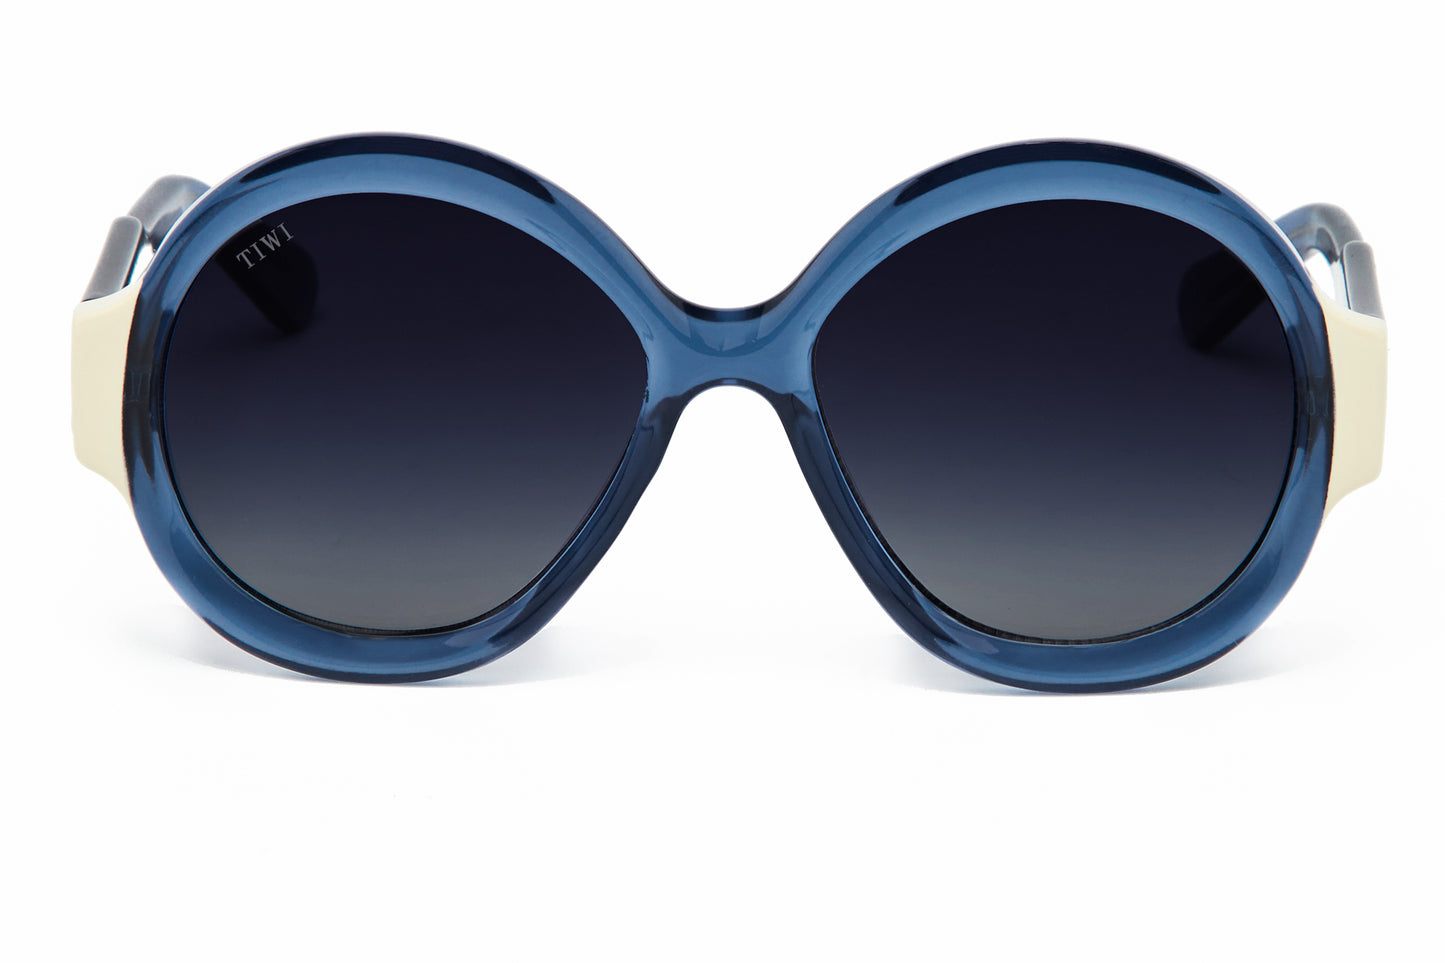 GAMBETTA Sunglasses Available in more colors Ocean Blue/Beige with Blue Gradient Lenses  